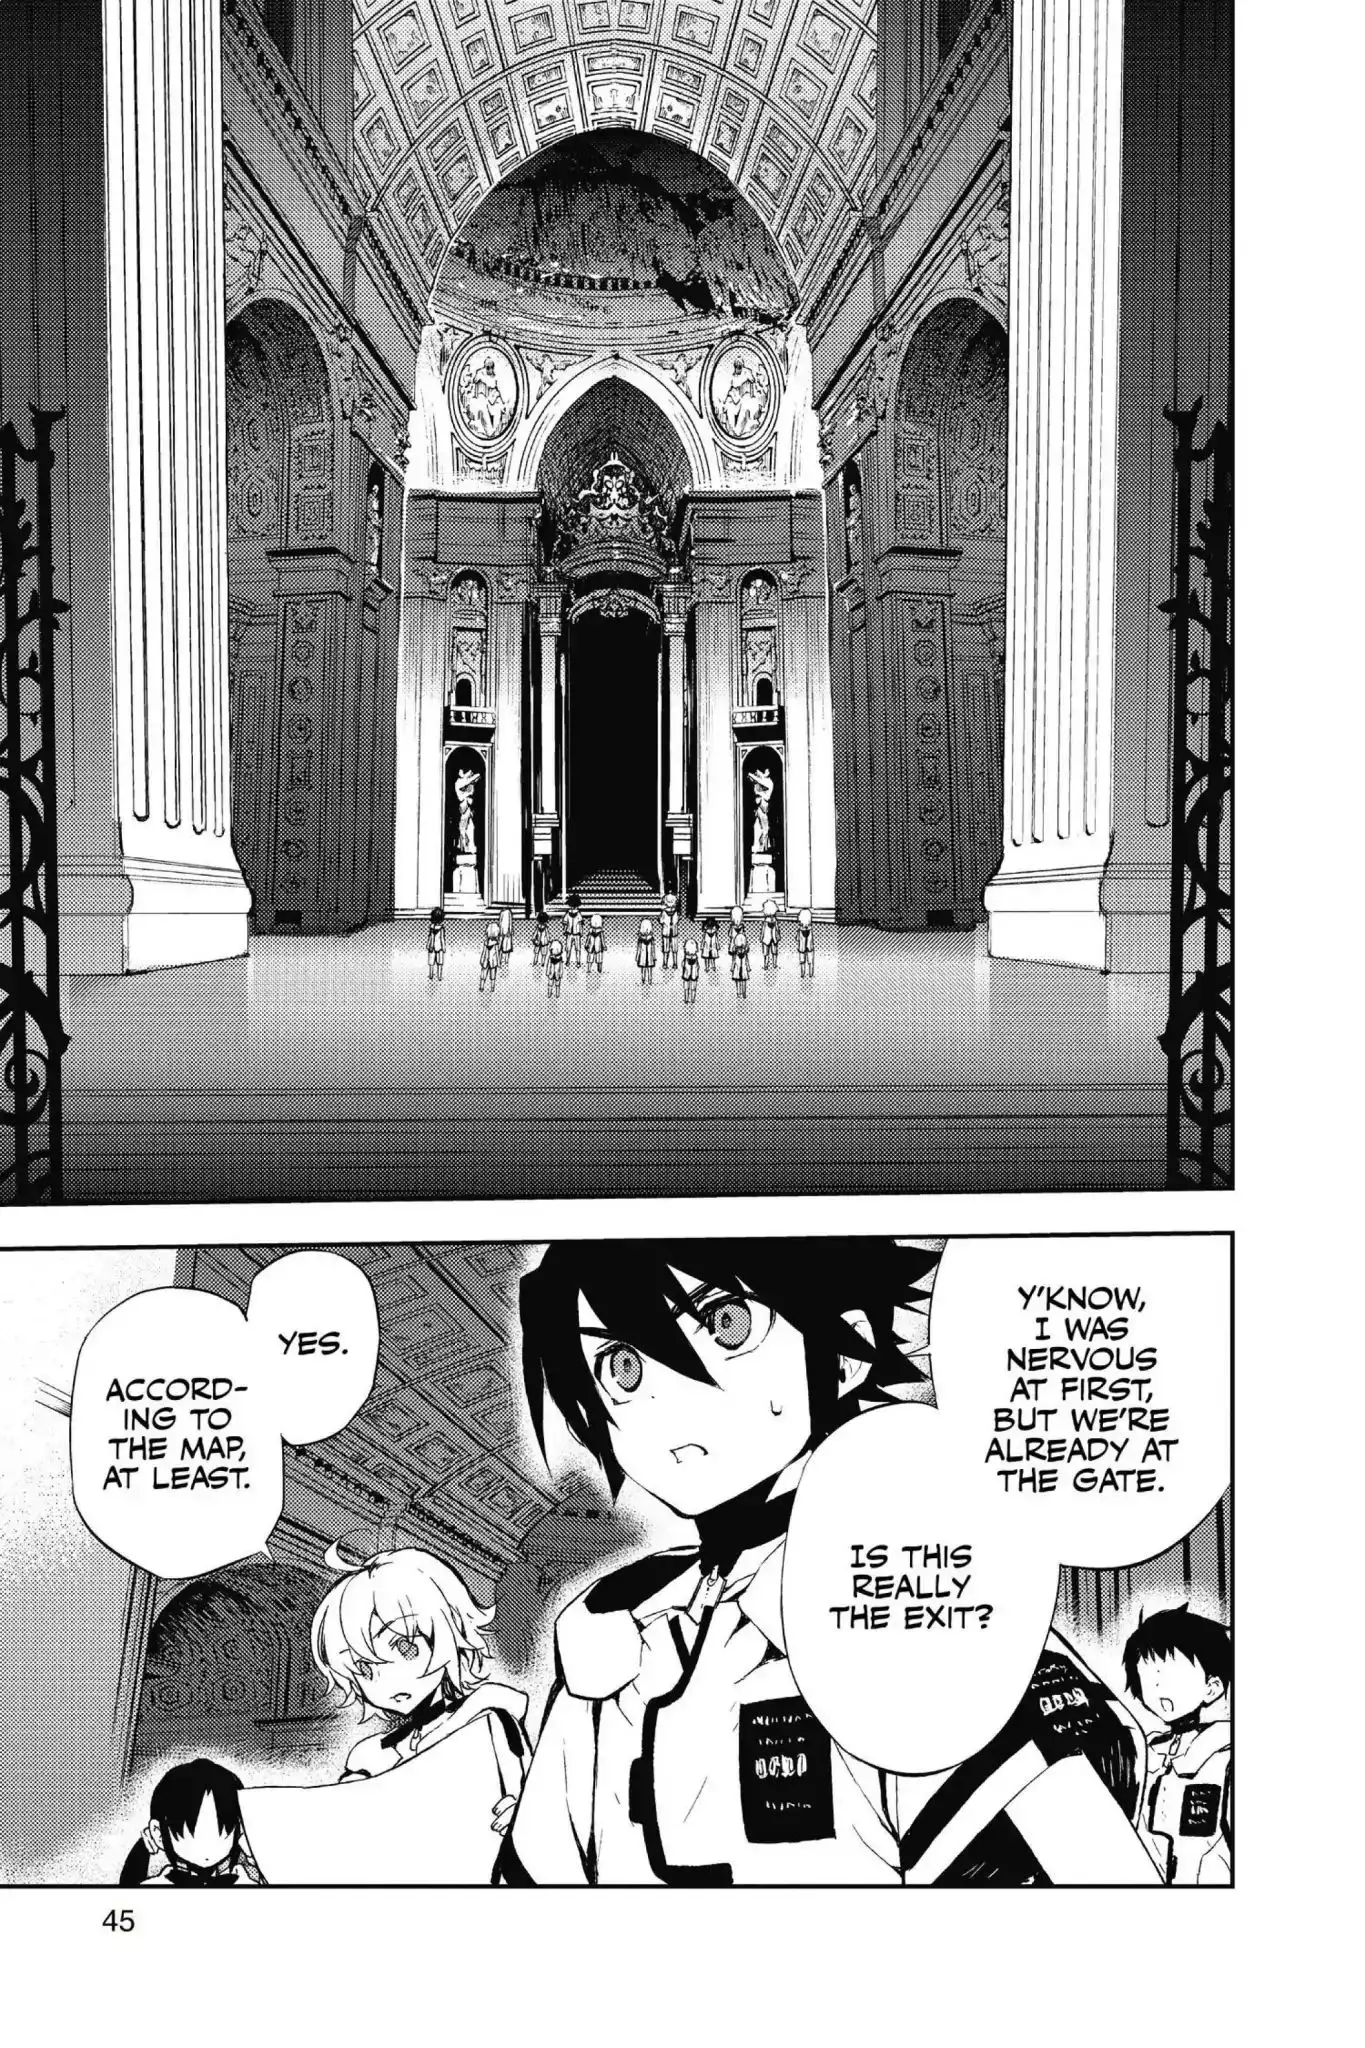 Seraph Of The End - 1 page 47-918dc64b